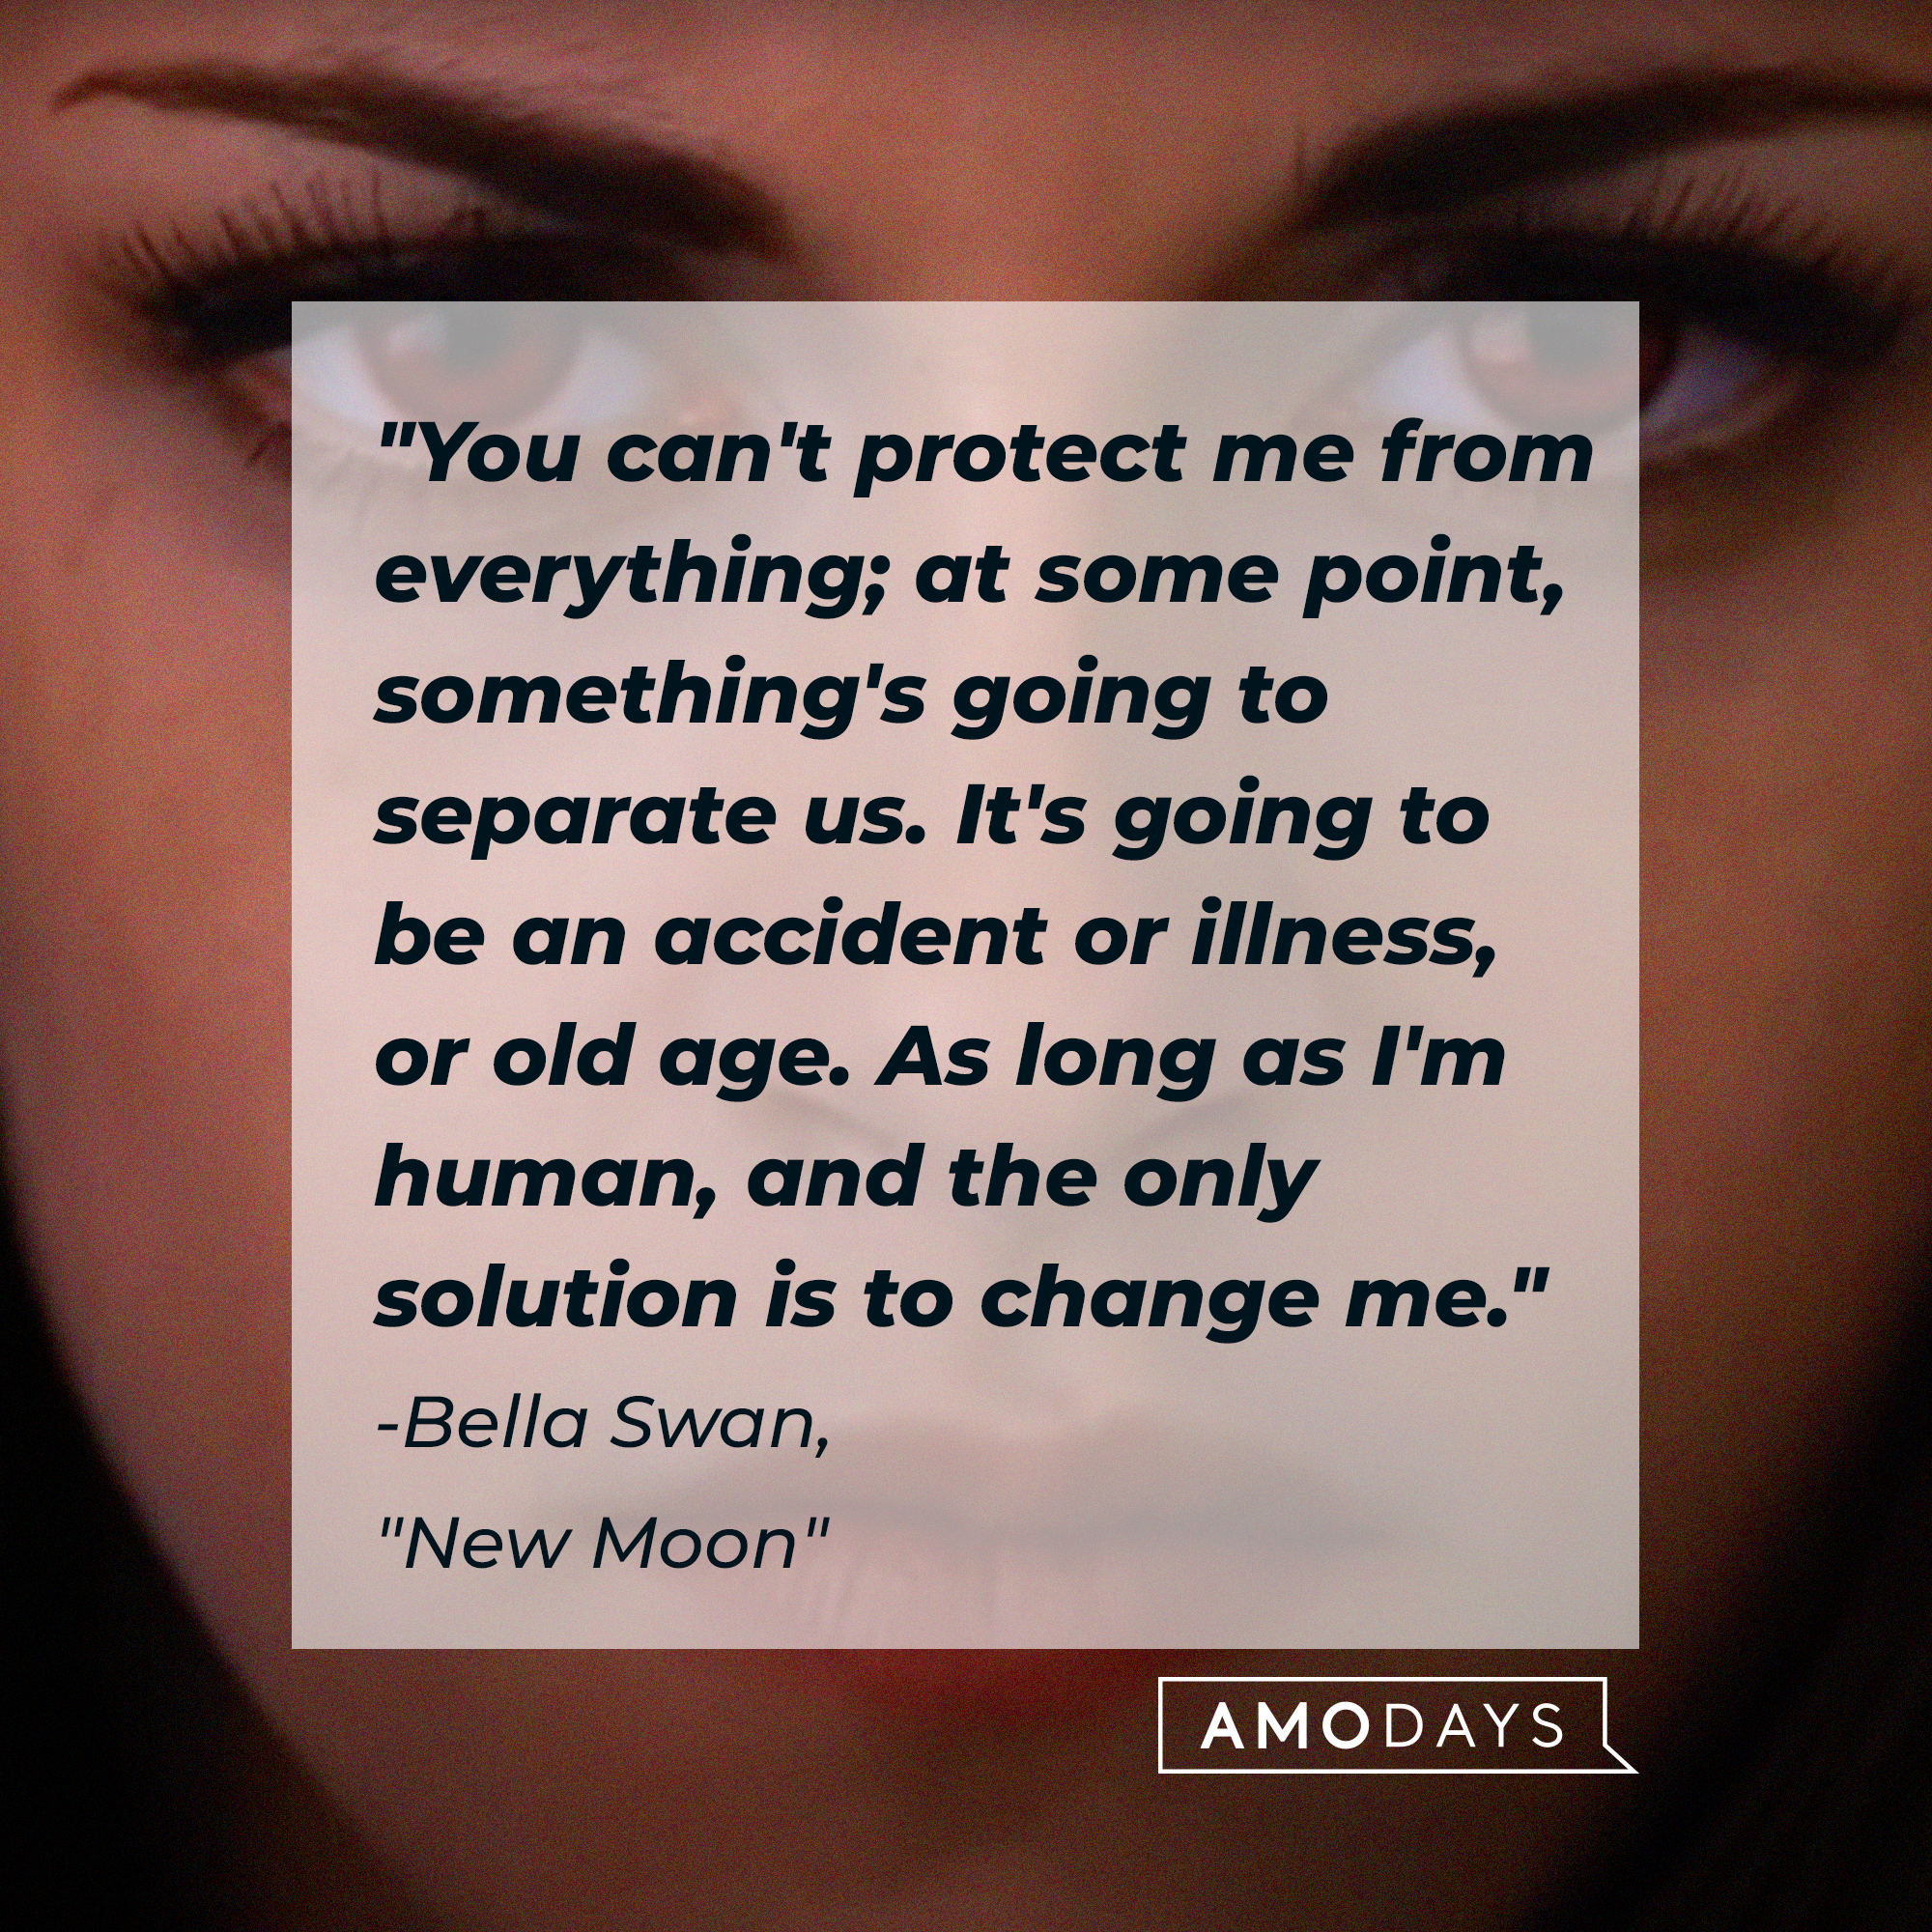 Bella Swan with her quote: "You can't protect me from everything; at some point, something's going to separate us. It's going to be an accident or illness, or old age. As long as I'm human, and the only solution is to change me." | Source: Facebook.com/twilight